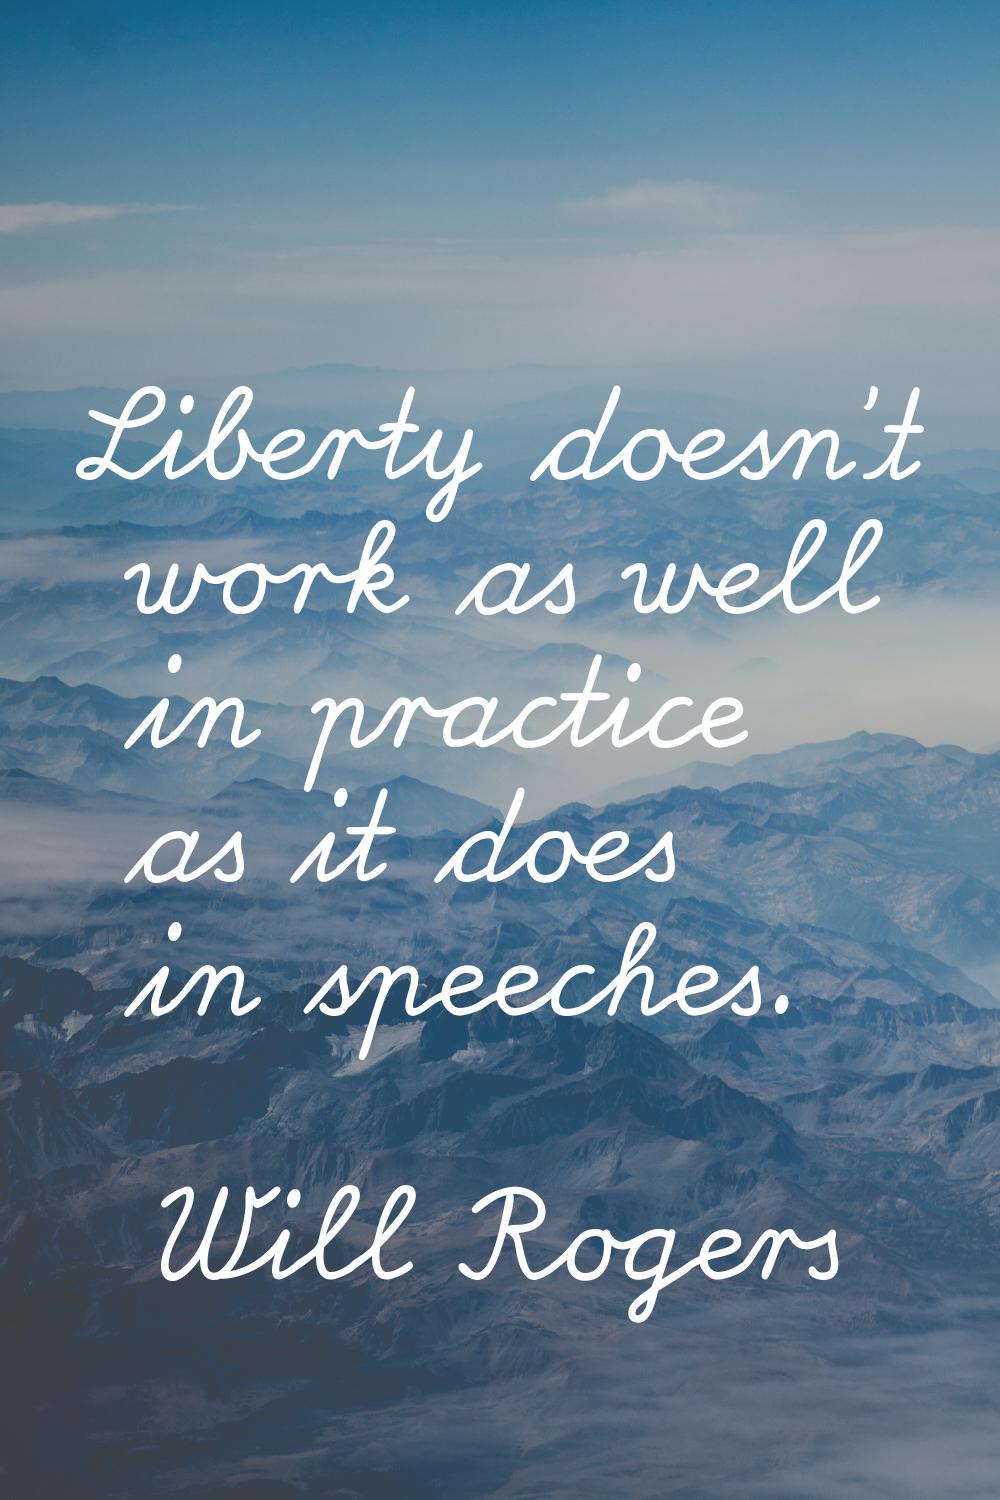 Liberty doesn't work as well in practice as it does in speeches.